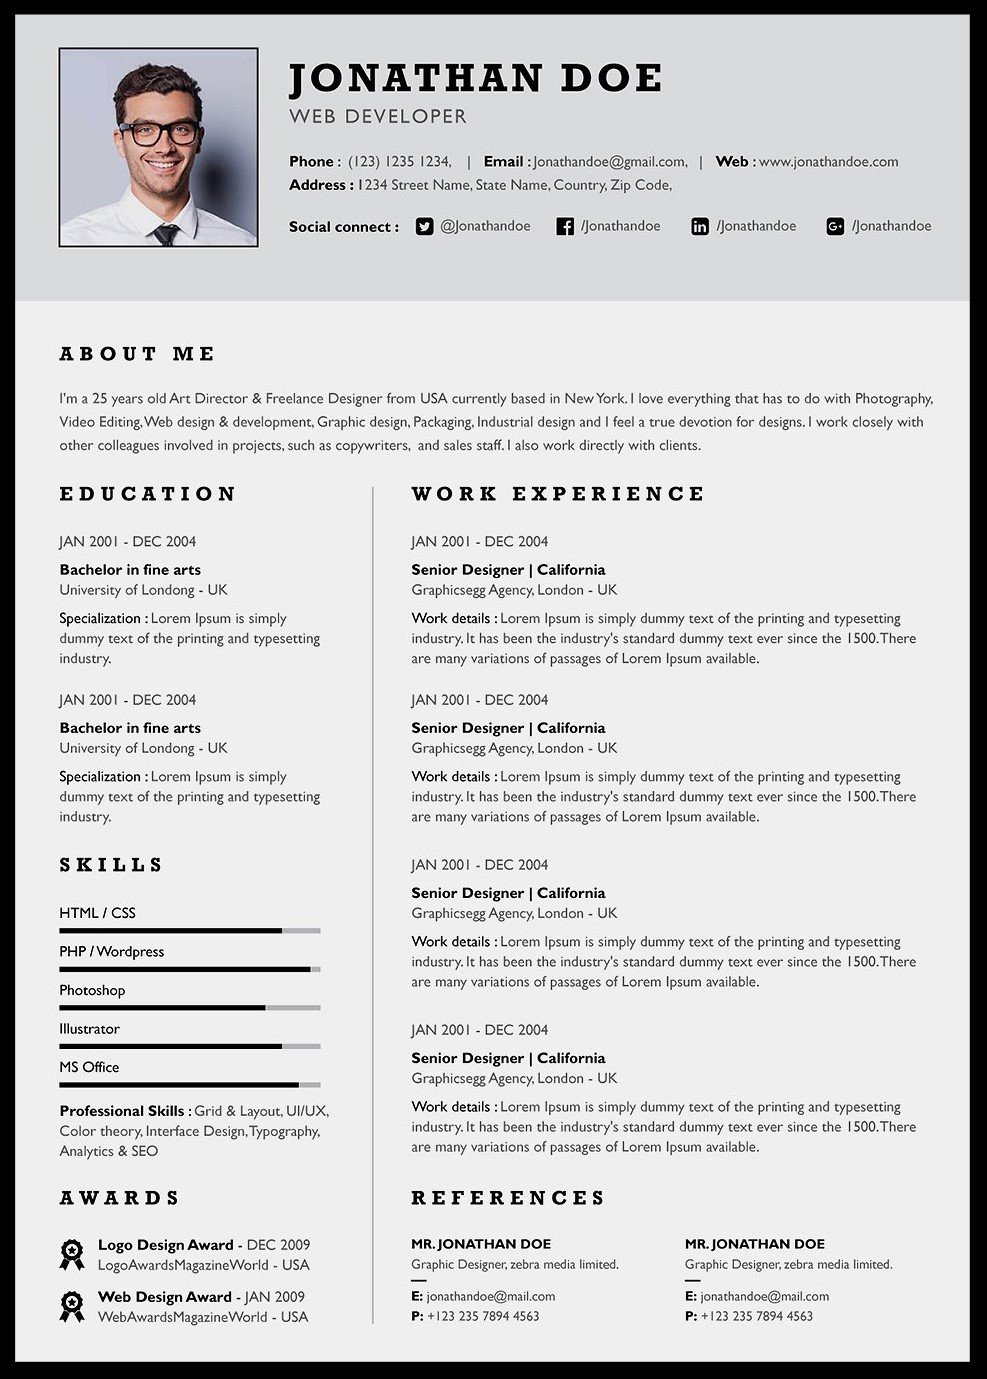 7 Simple Resume Templates to Help You Raise Your Resume ...